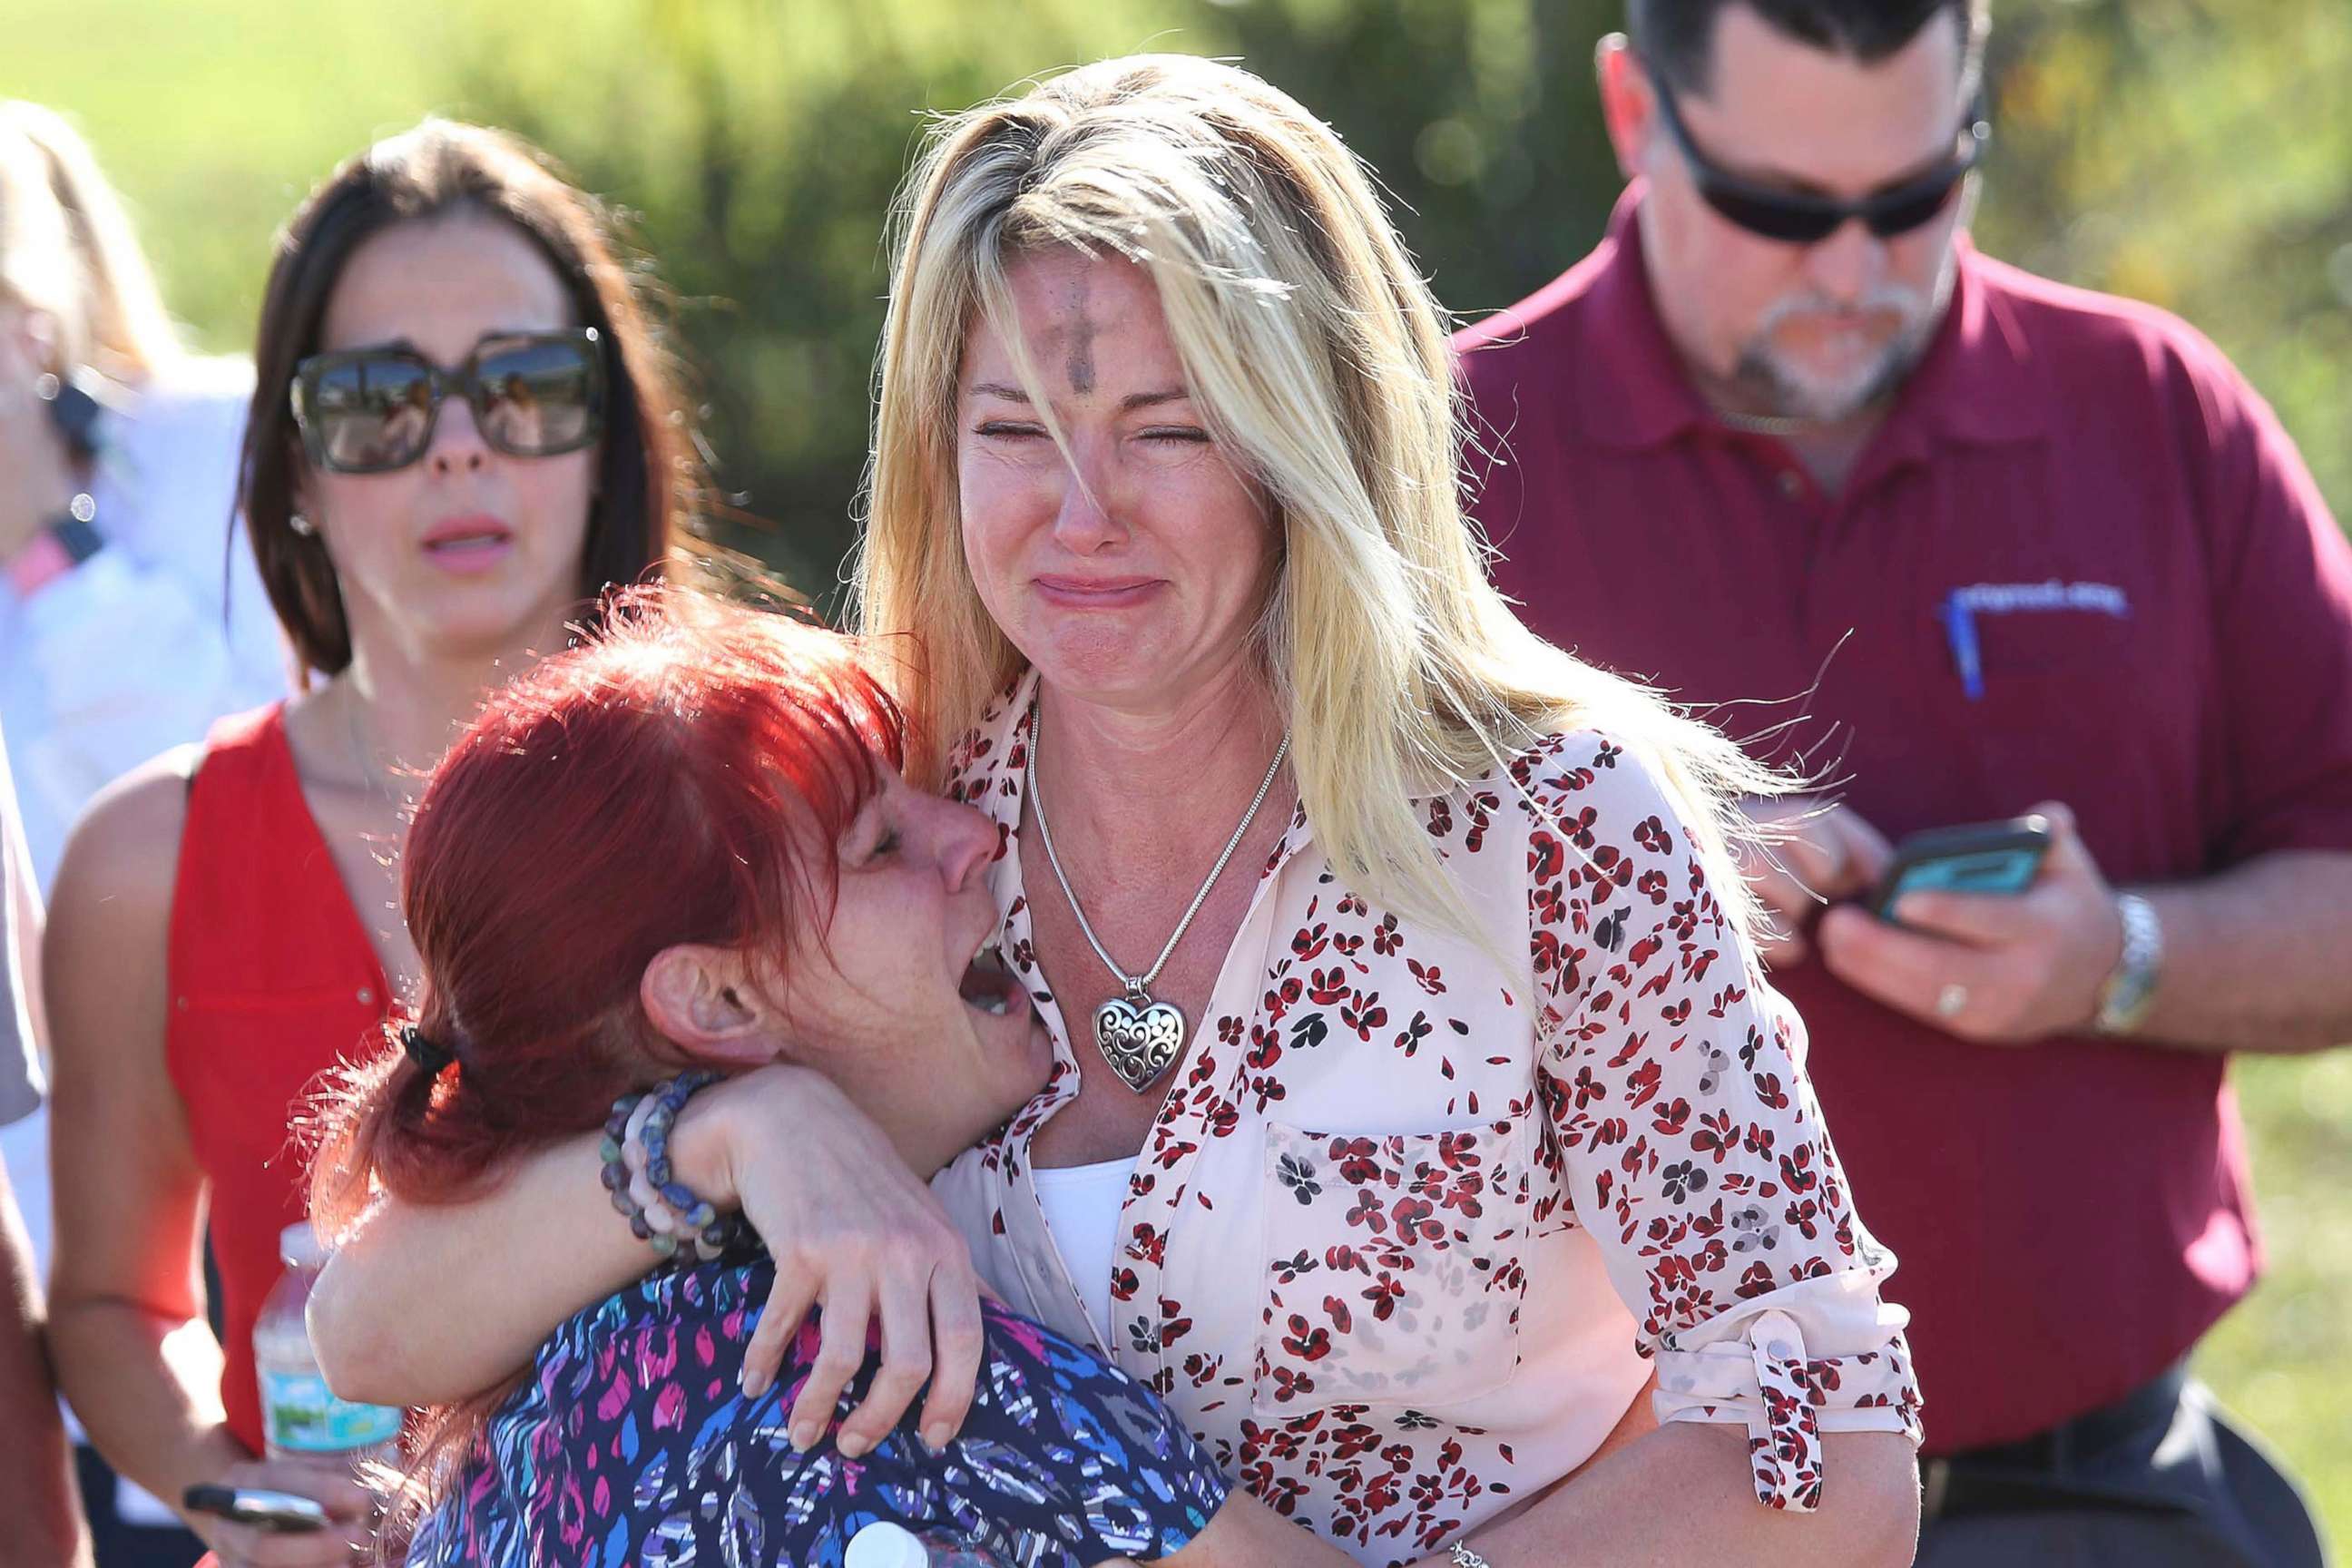 PHOTO: Women embrace in a waiting area for parents of students after a shooting at Marjory Stoneman Douglas High School in Parkland, Fla., Feb. 14, 2018.